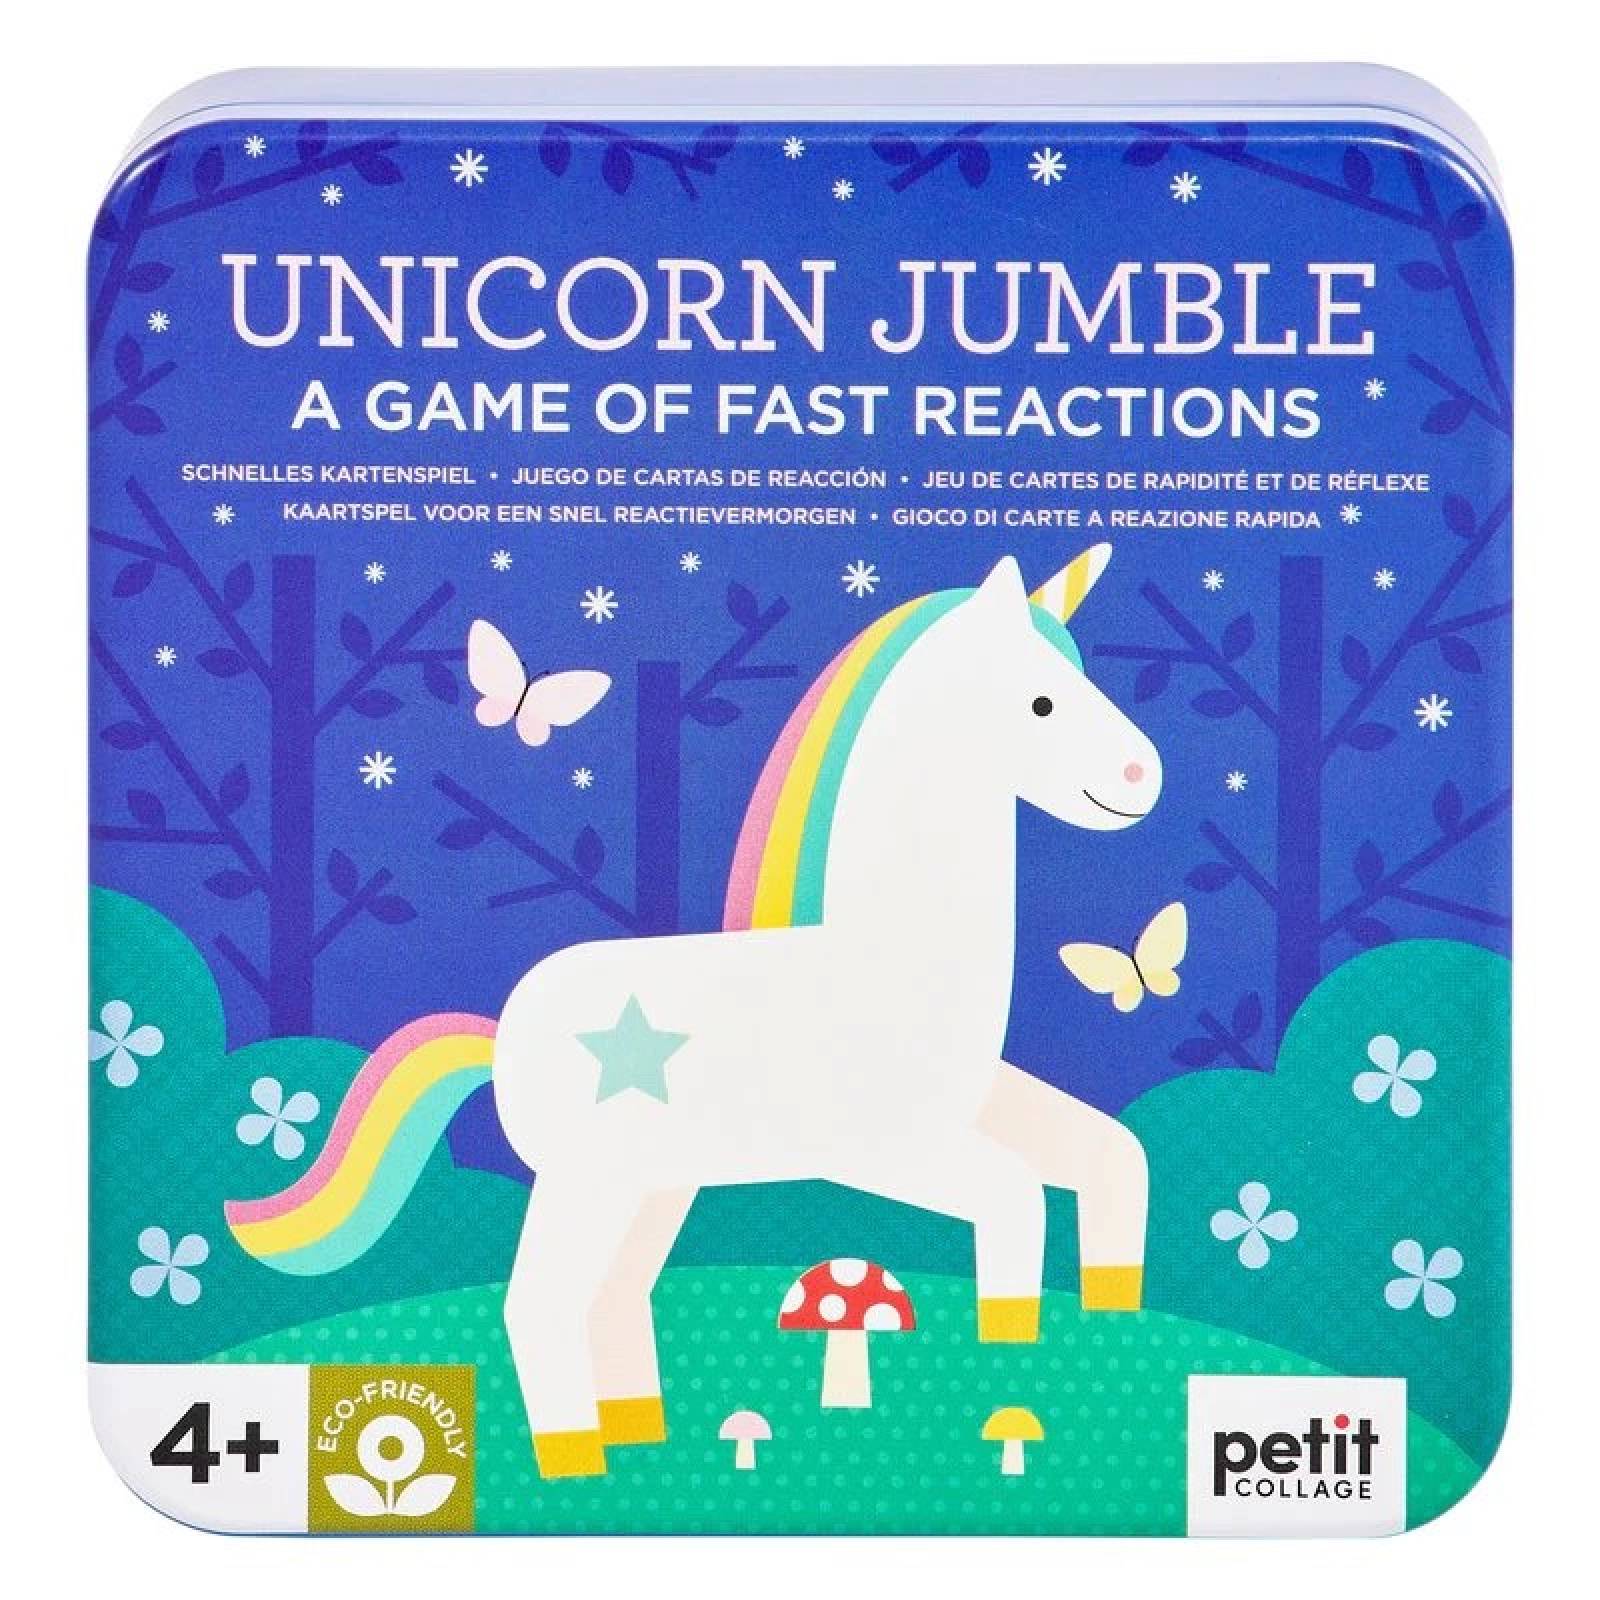 Unicorn Jumble - A Game Of Fast Reactions Card Game 4+